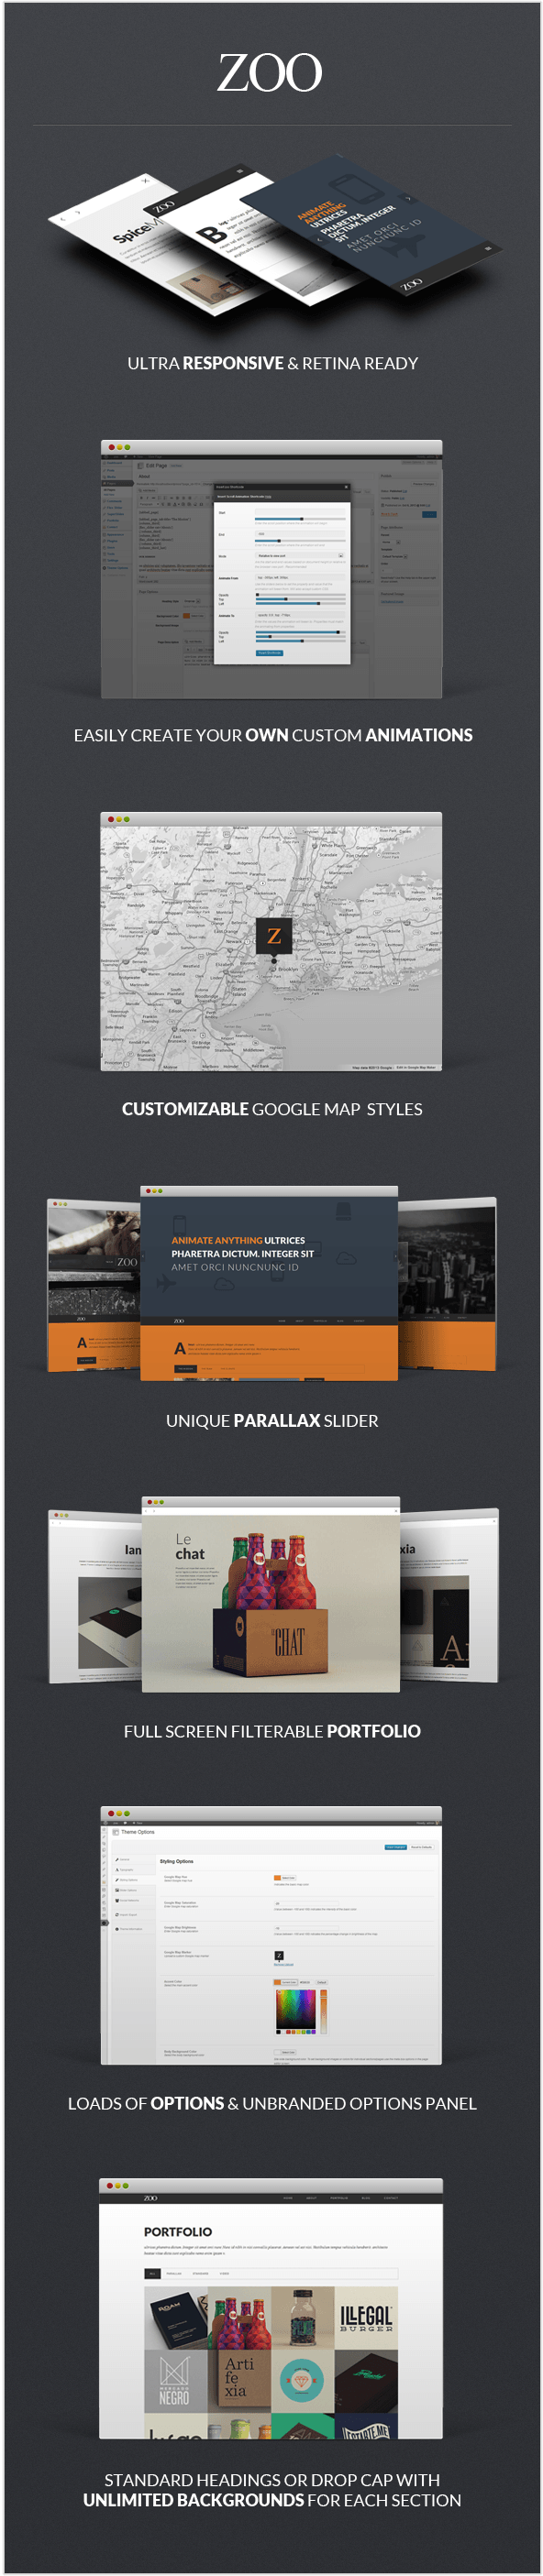 Zoo - Responsive One Page Parallax Theme - 3